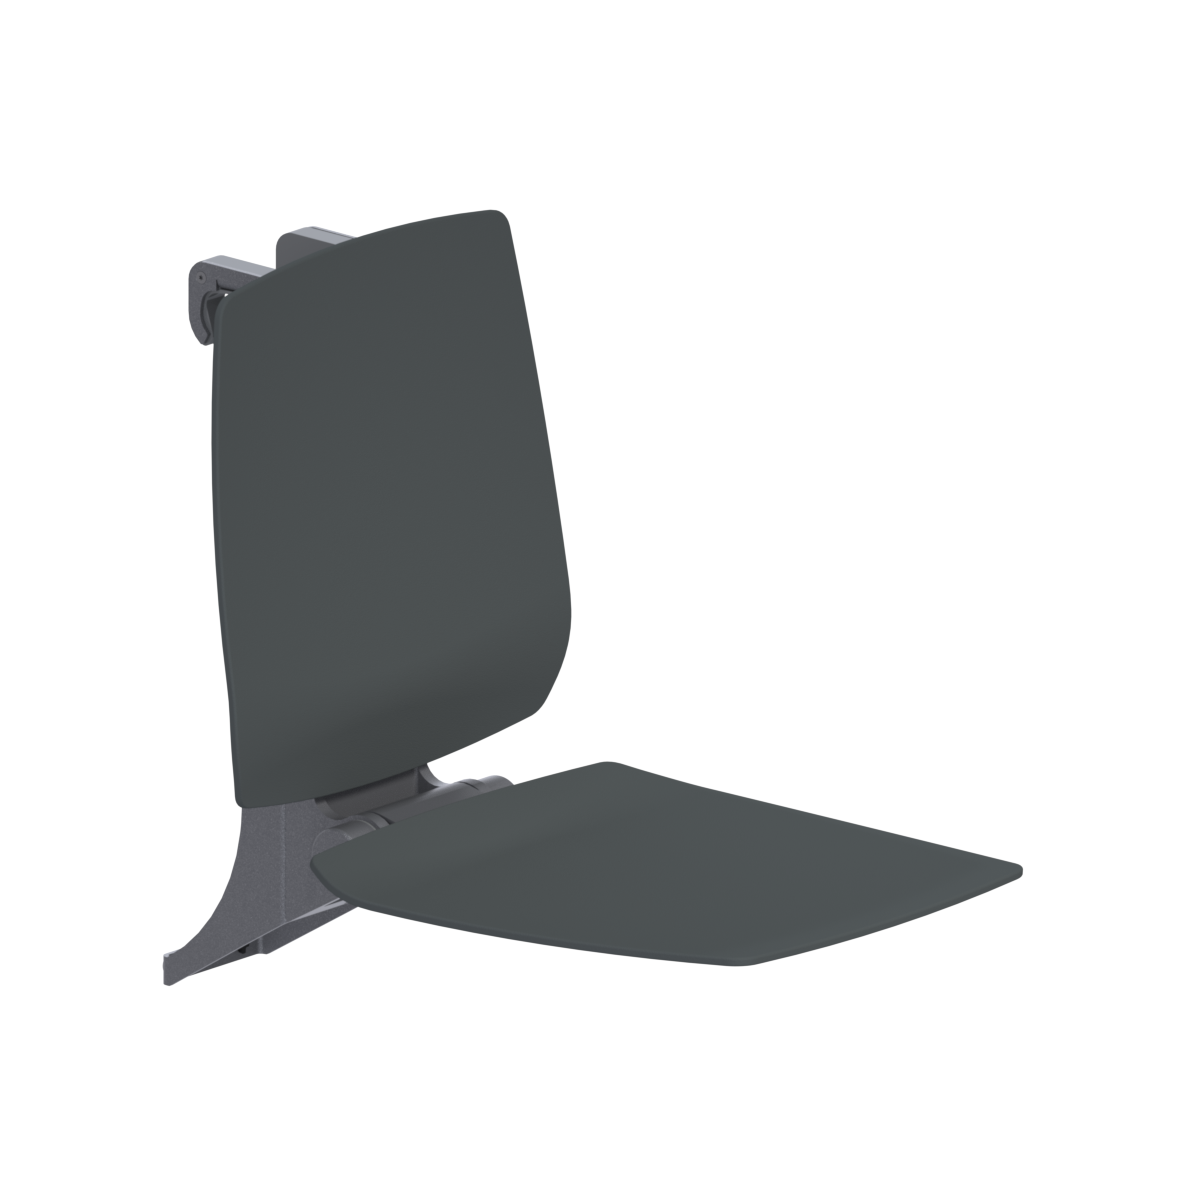 Ascento Hanging seat, with Backrest, for Cavere Care, 412 x 640 x 574 mm, Ascento Dark grey